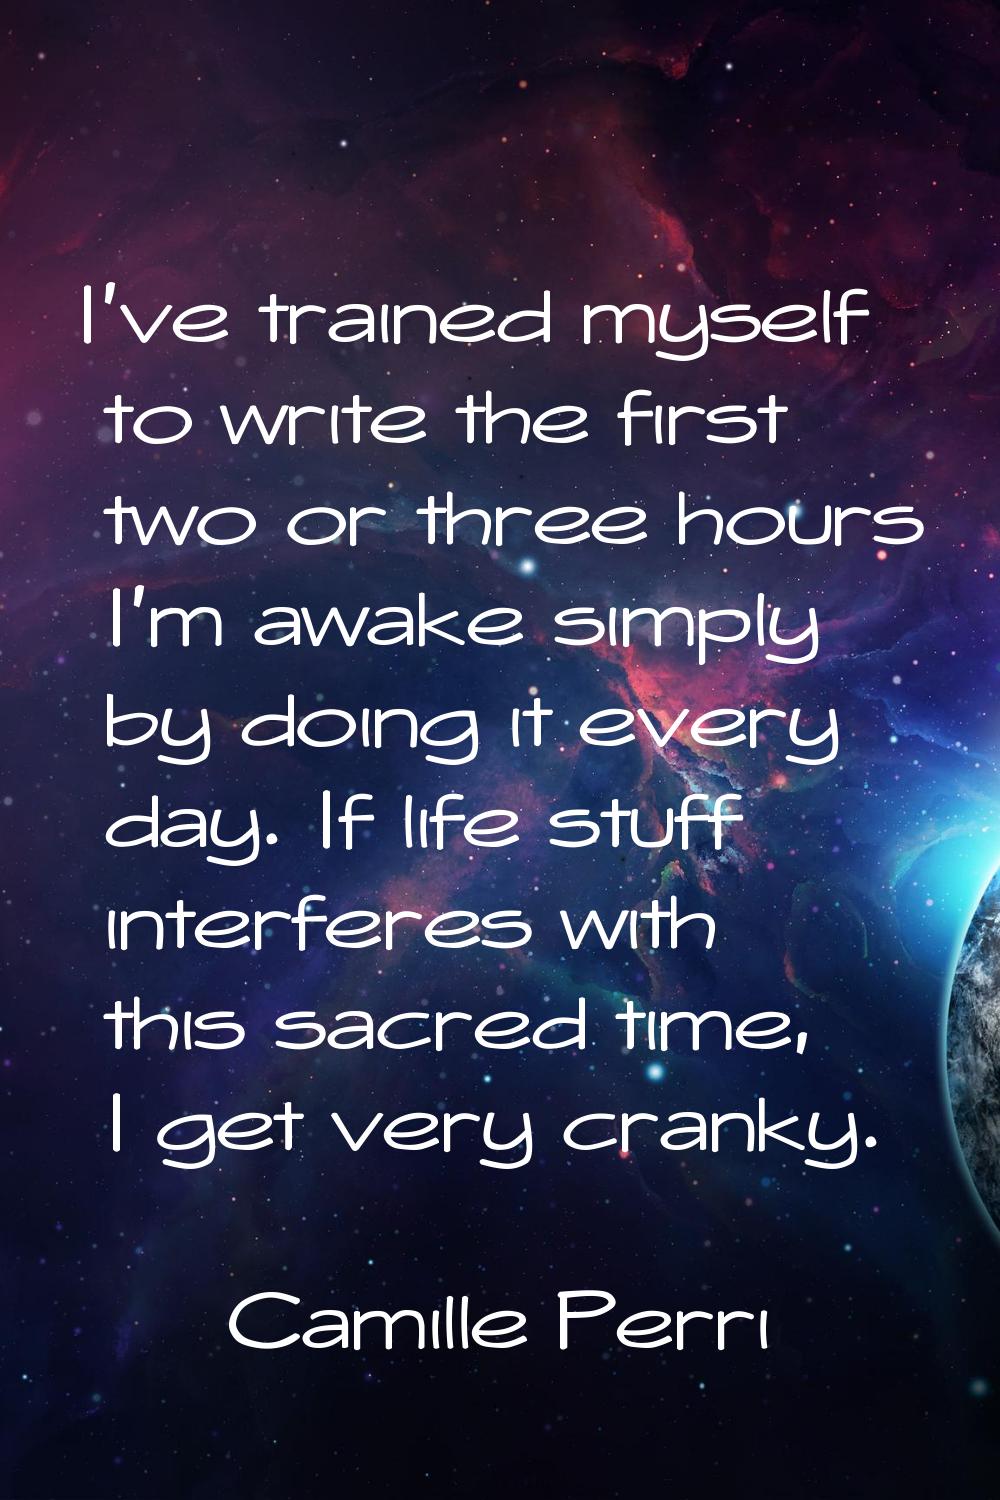 I've trained myself to write the first two or three hours I'm awake simply by doing it every day. I